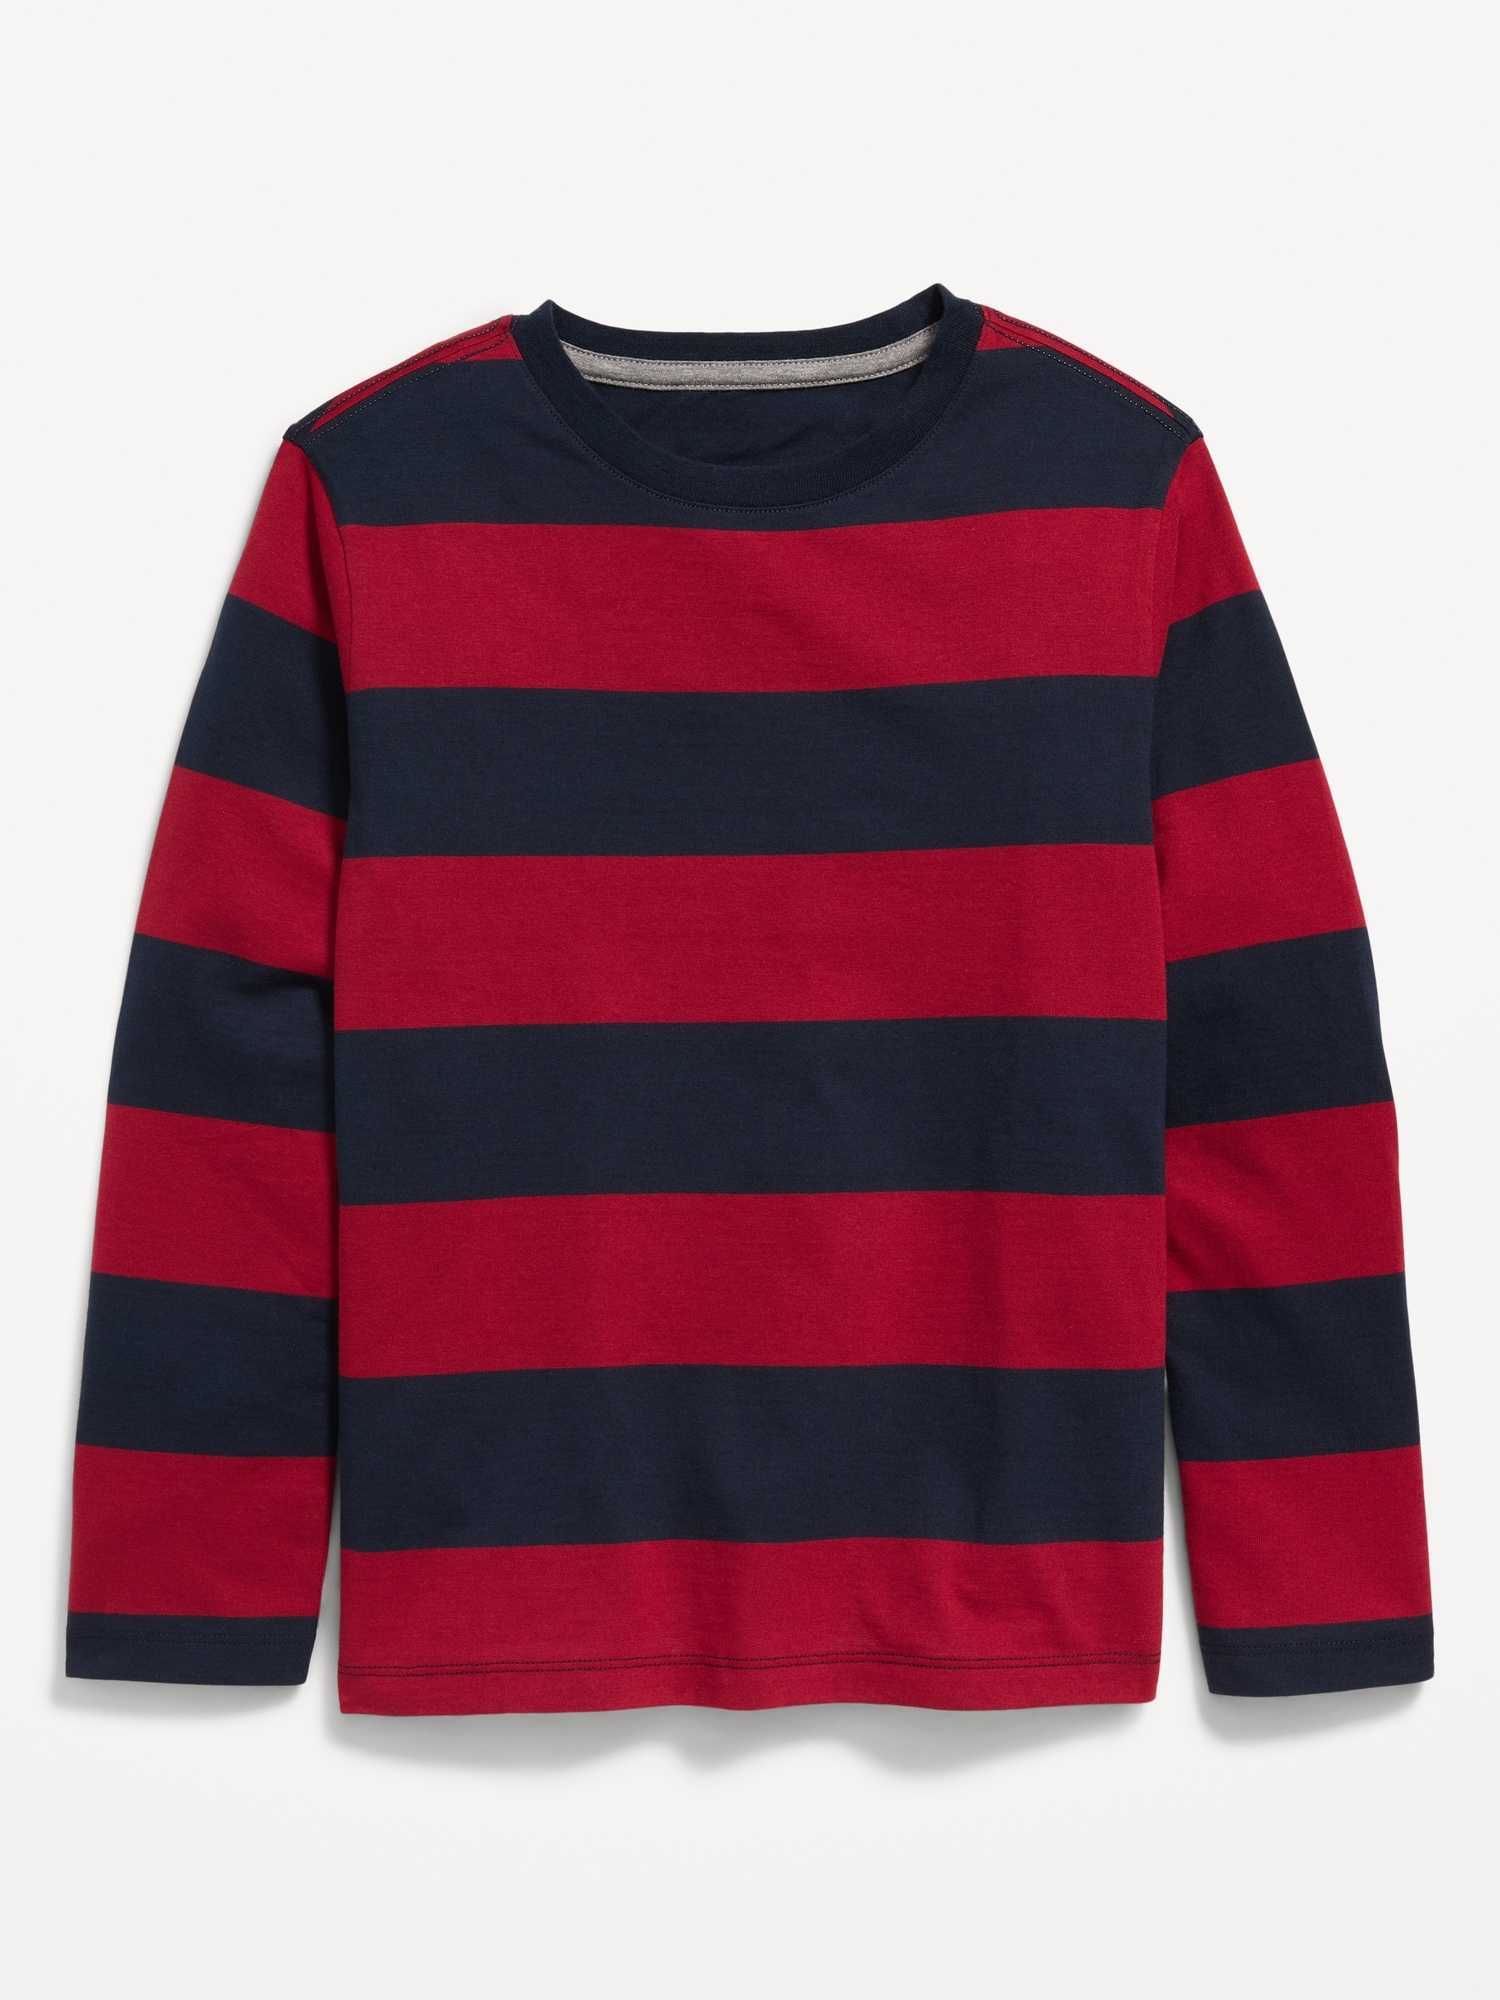 Softest Long-Sleeve Striped T-Shirt for Boys